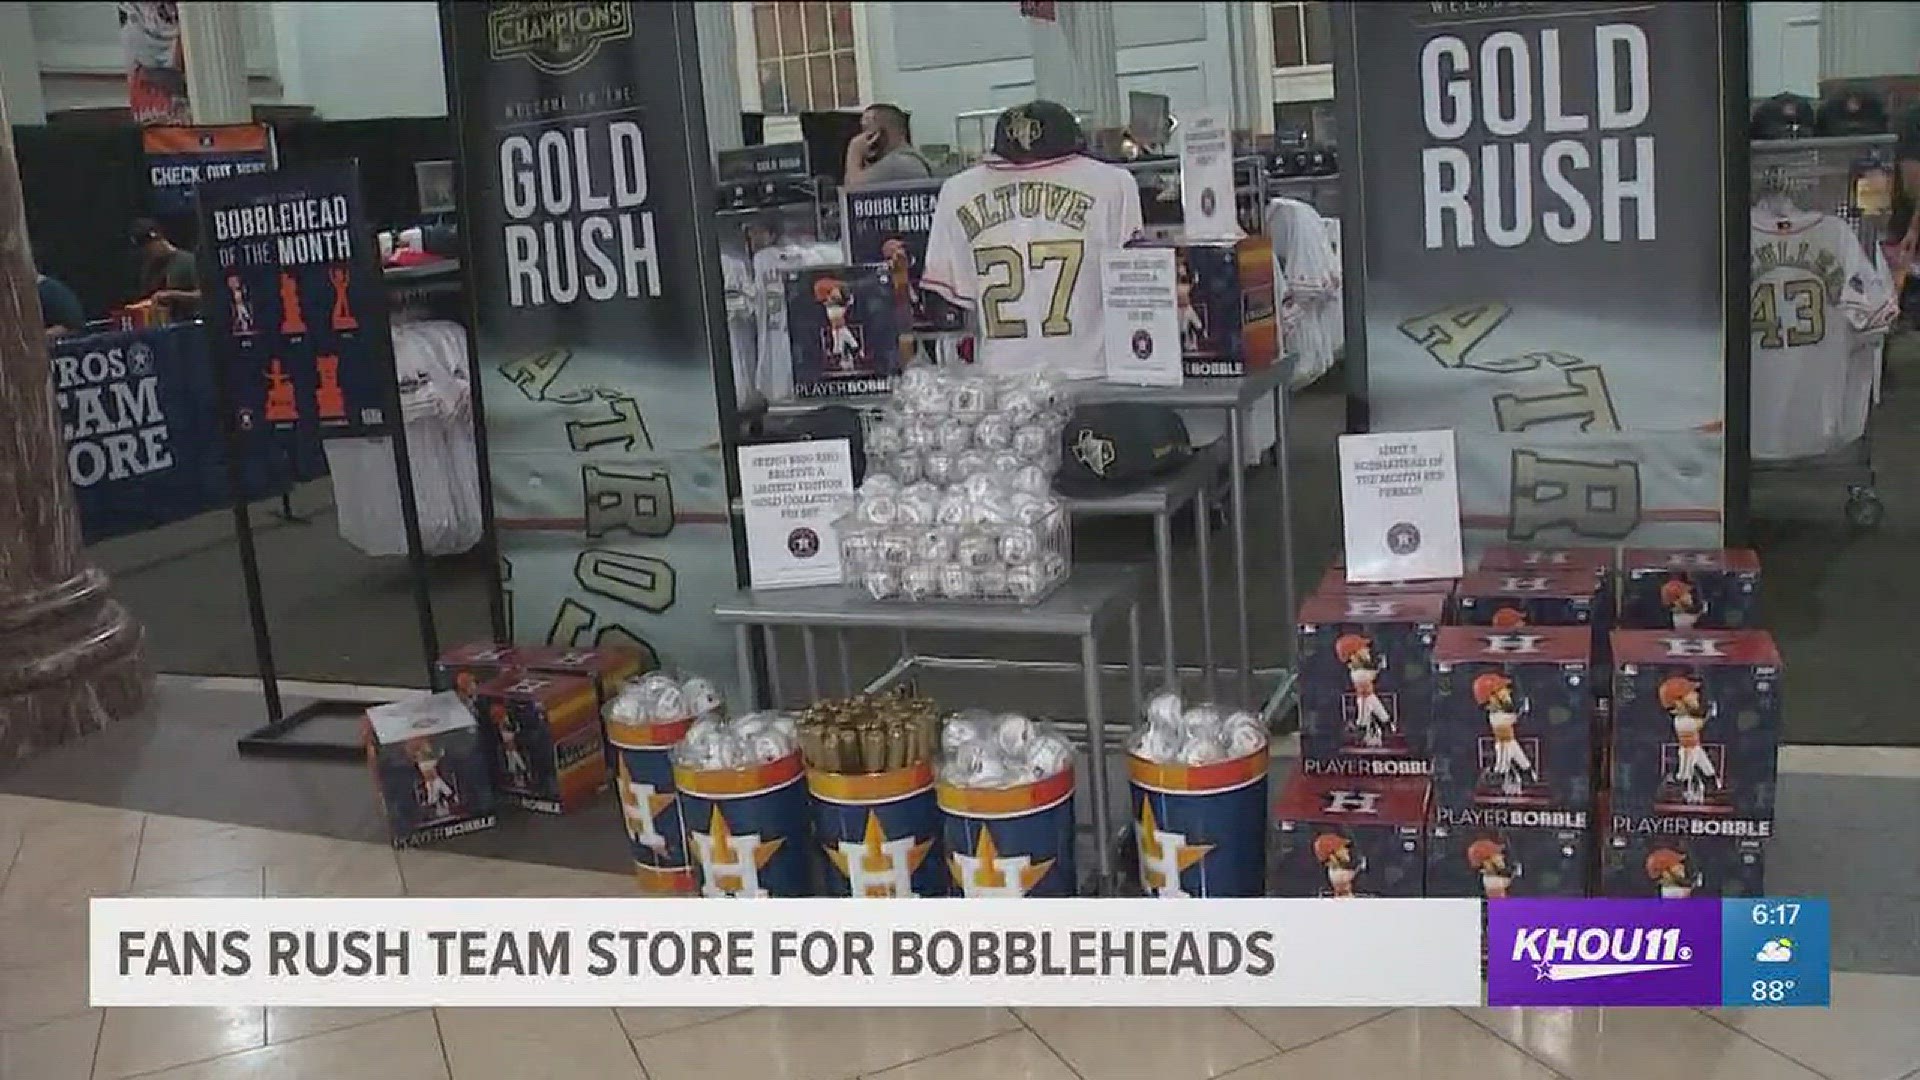 The Houston Astros rolled out new championship gear and more gold jerseys Wednesday morning. They also released new George Springer bobbleheads.